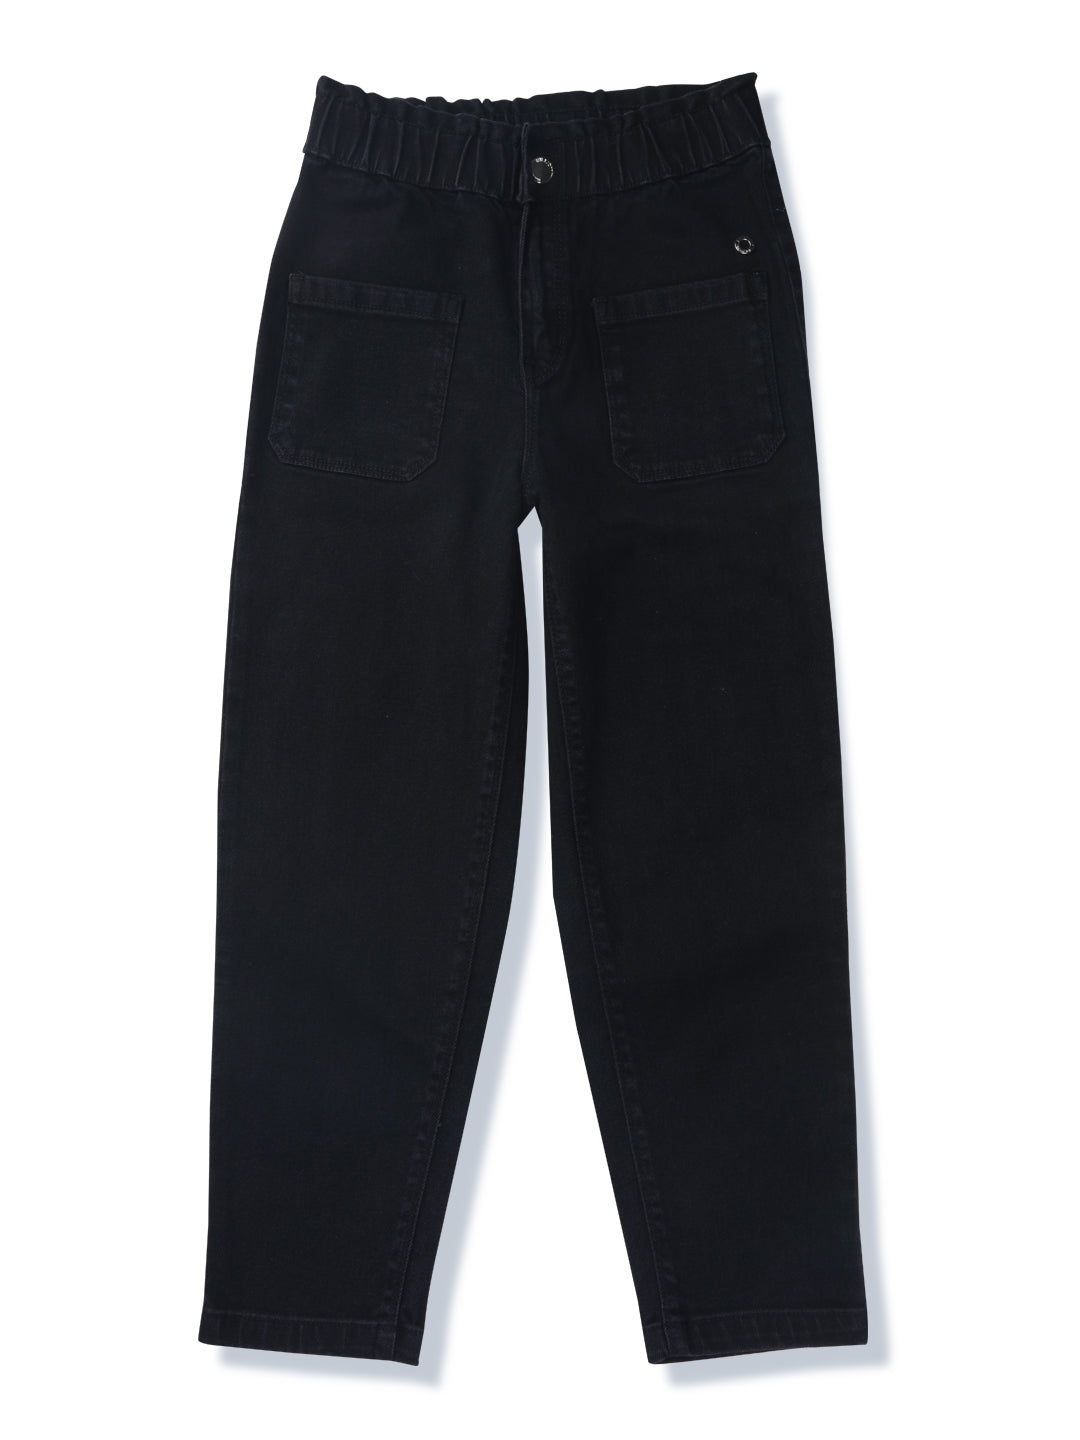 Girls Black Solid Cotton Jeans